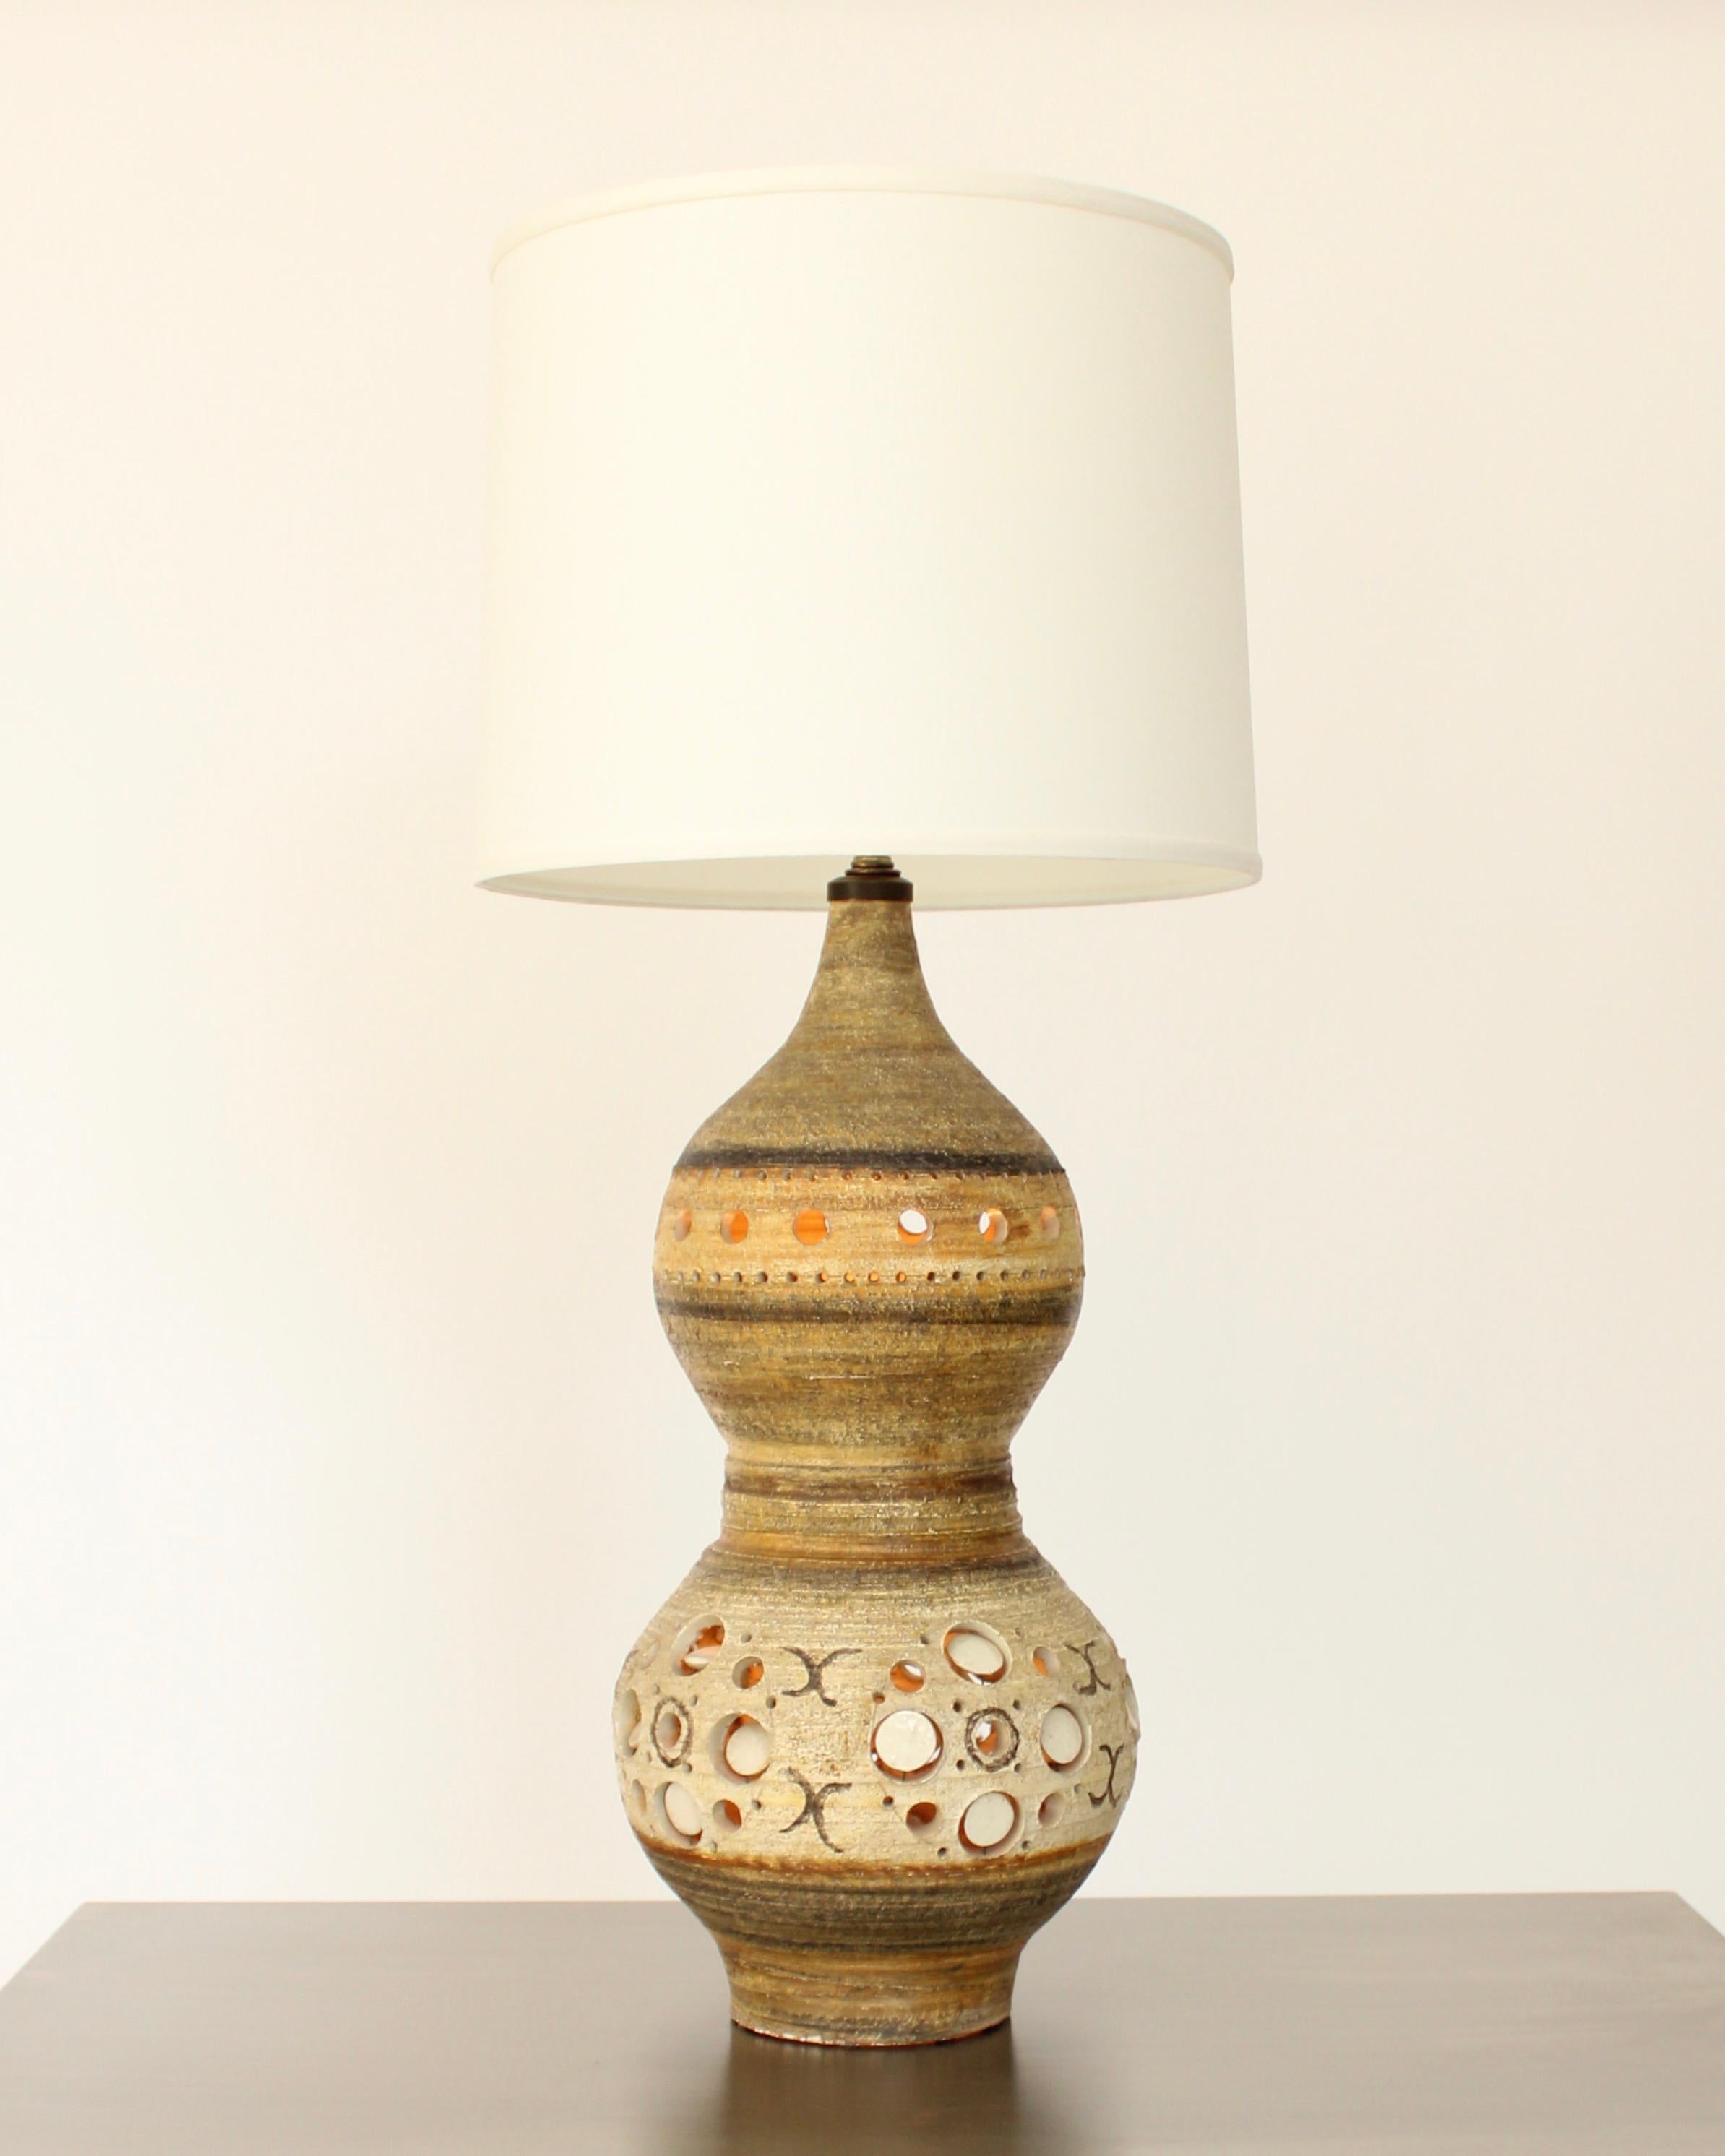 Georges Pelletier French ceramic double gourd form table lamp. 
This lamp has the iconic piercings into the clay with round disks. Light can emirate through the round piercings. 
This is an early lamp with lovely hand painted moon forms and warm